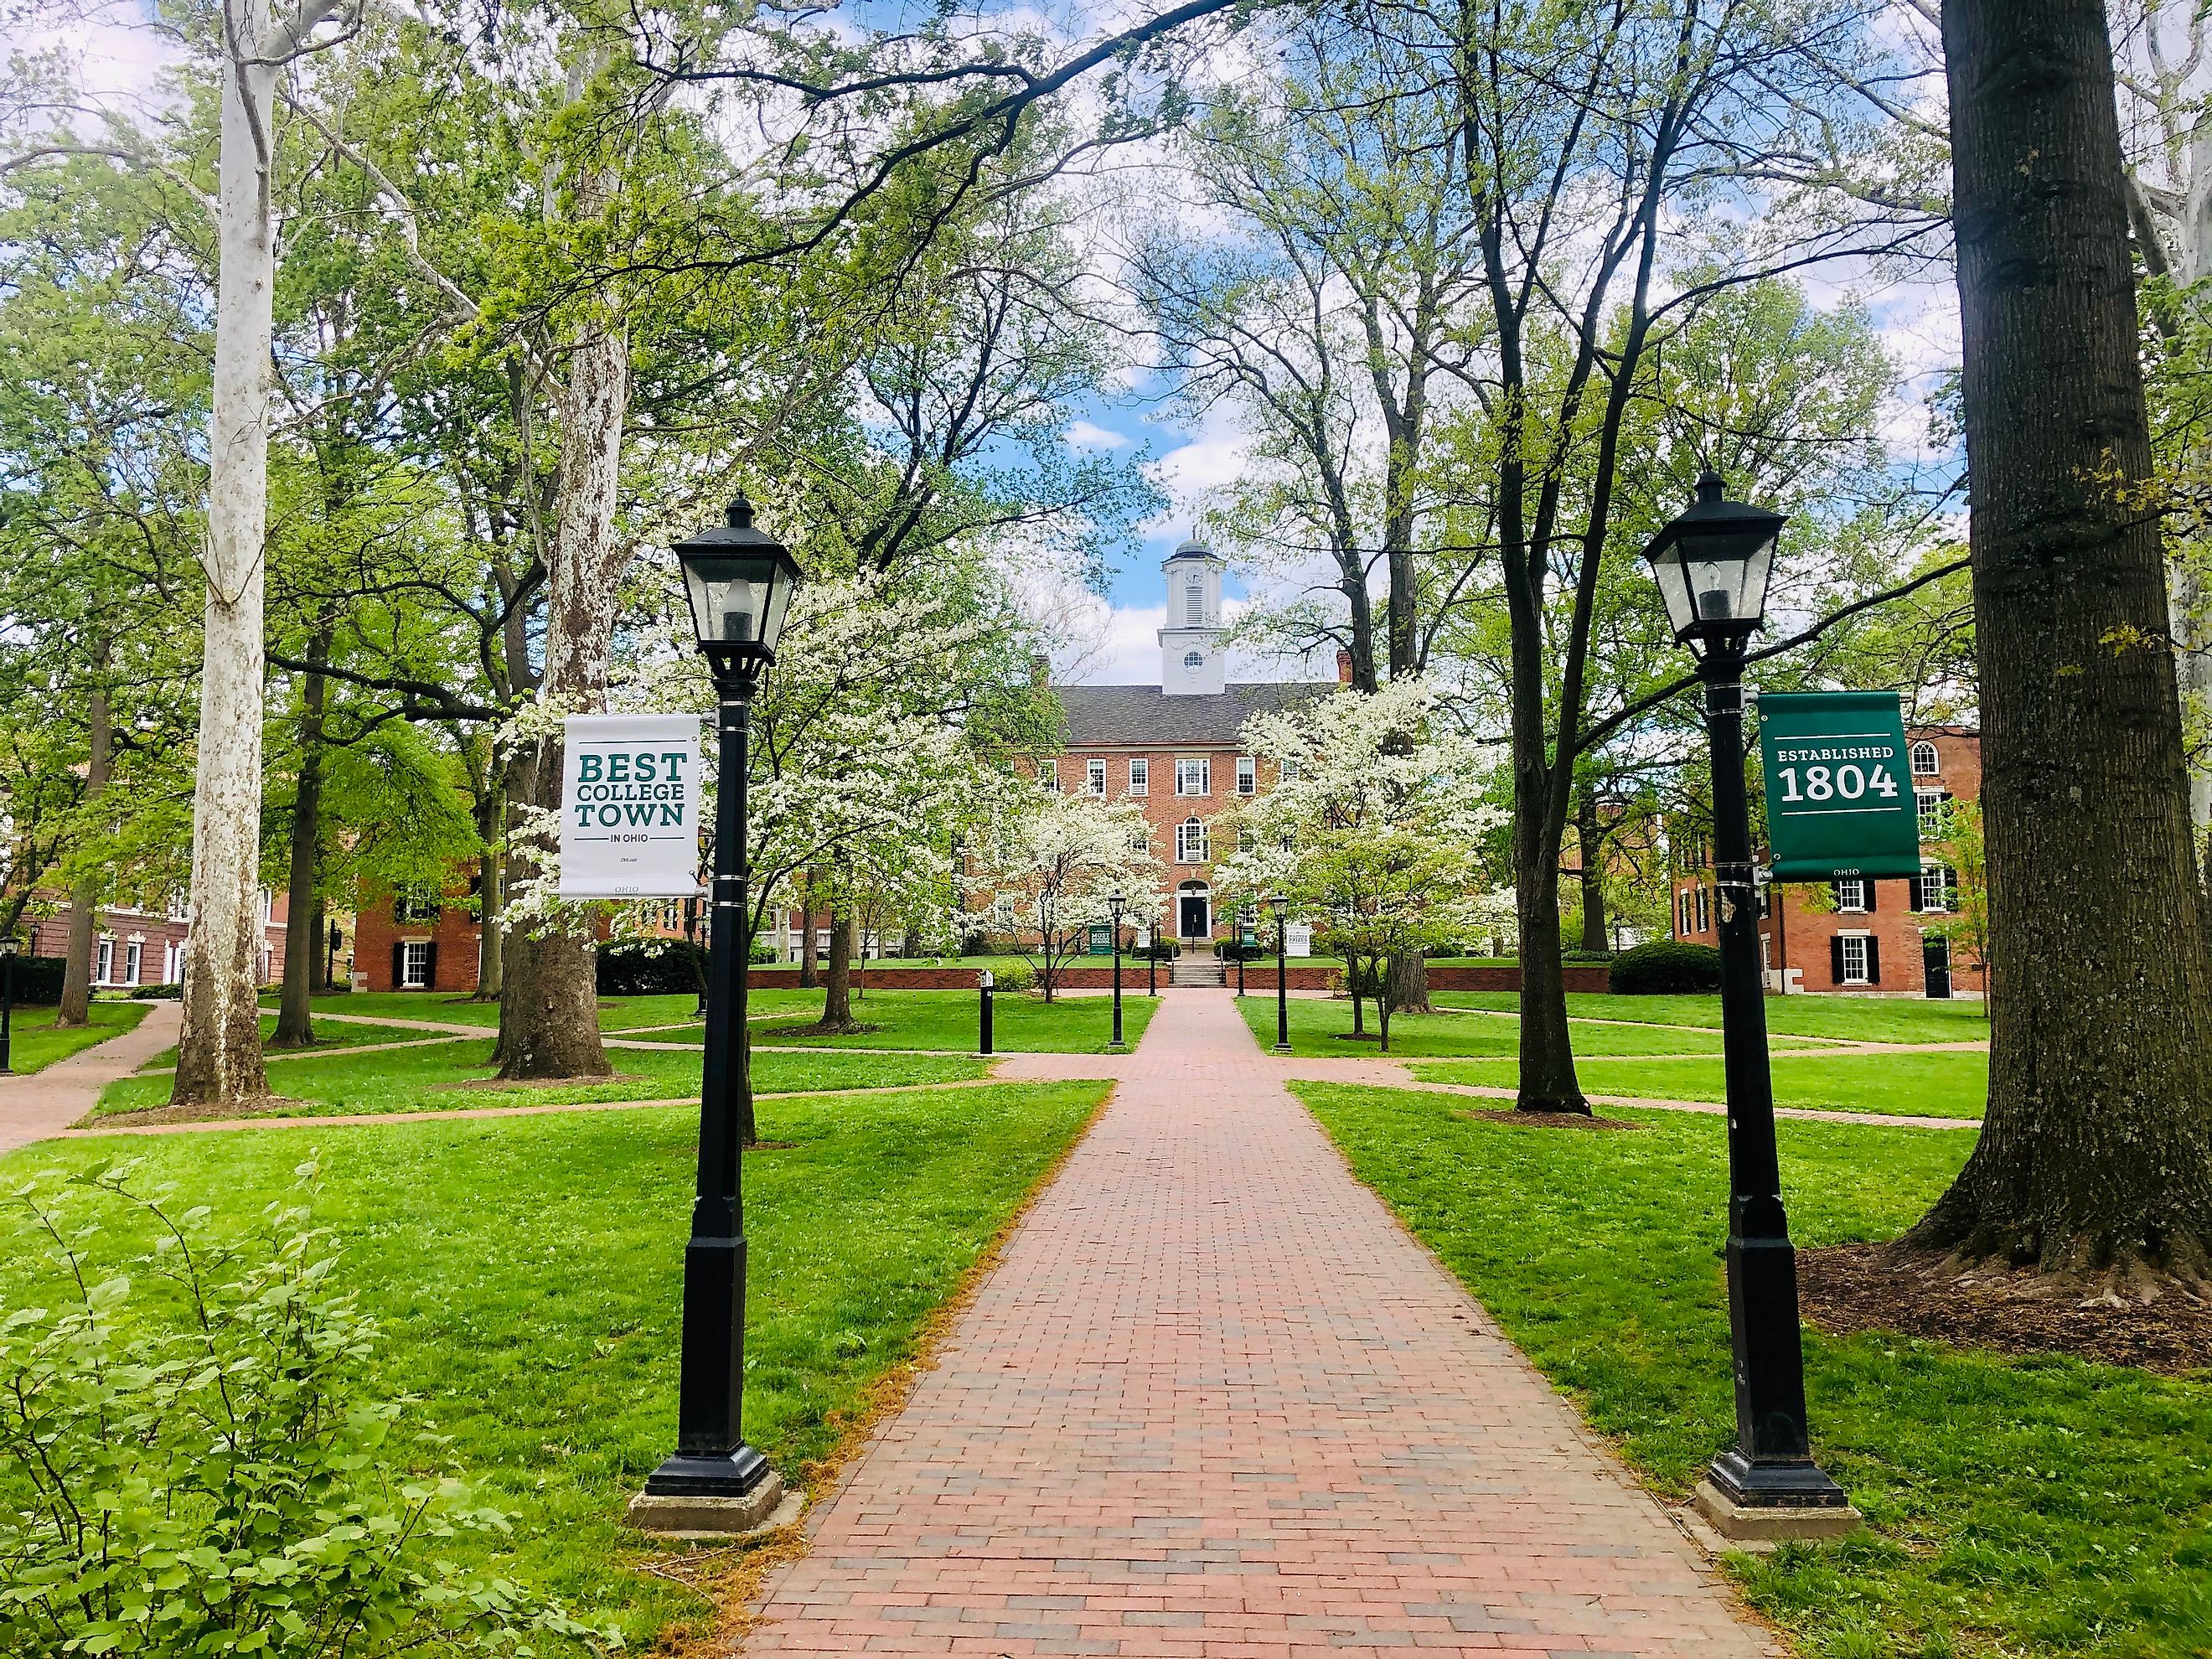 Springtime at Ohio University's main campus in Athens, Ohio, with lush greenery. Editorial credit: Wendy van Overstreet / Shutterstock.com